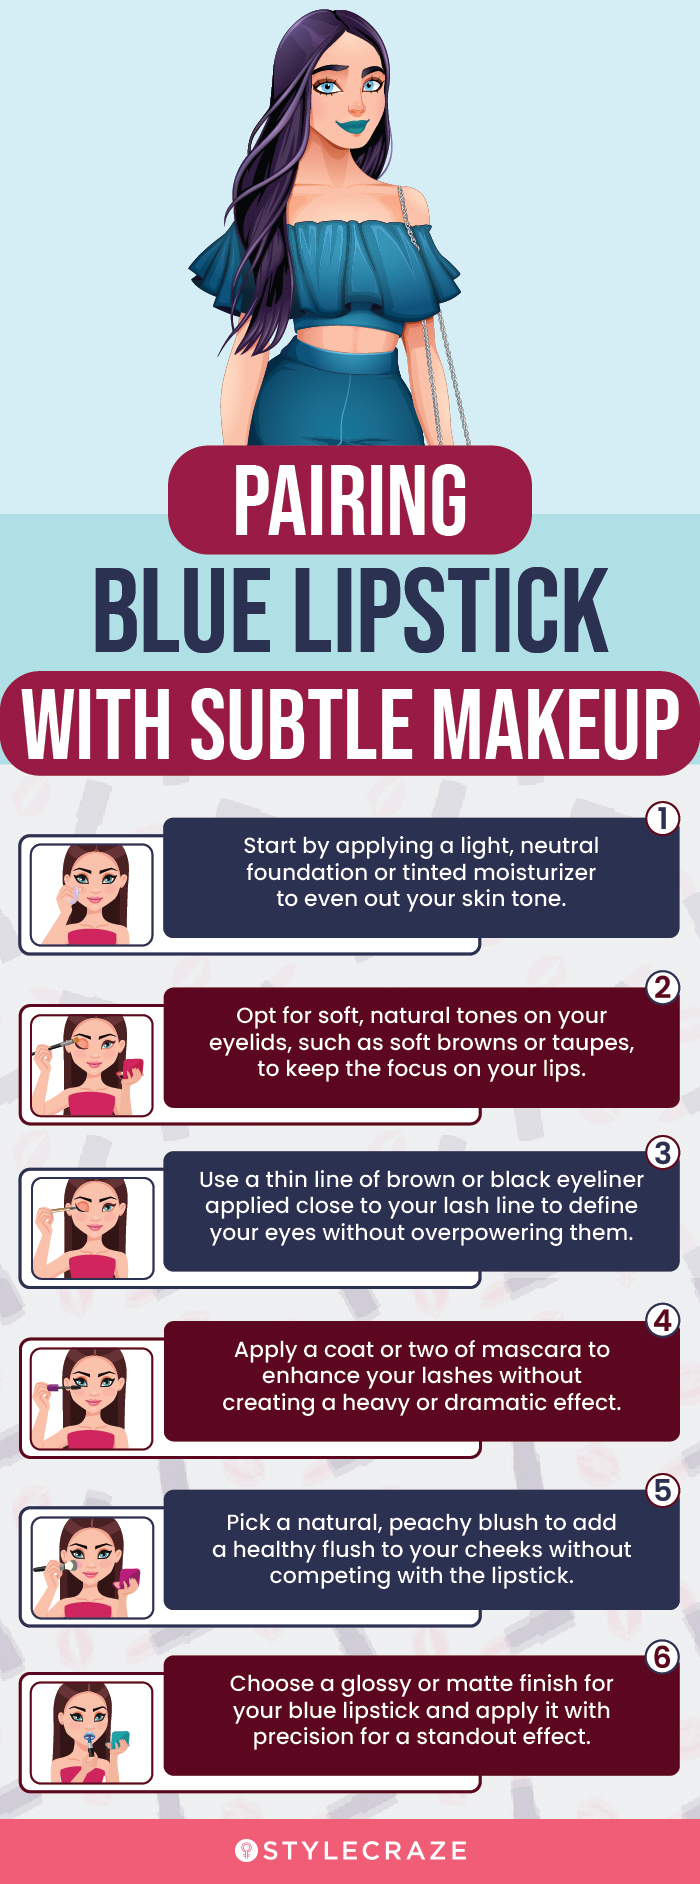 Pairing Blue Lipstick With Subtle Makeup (infographic)